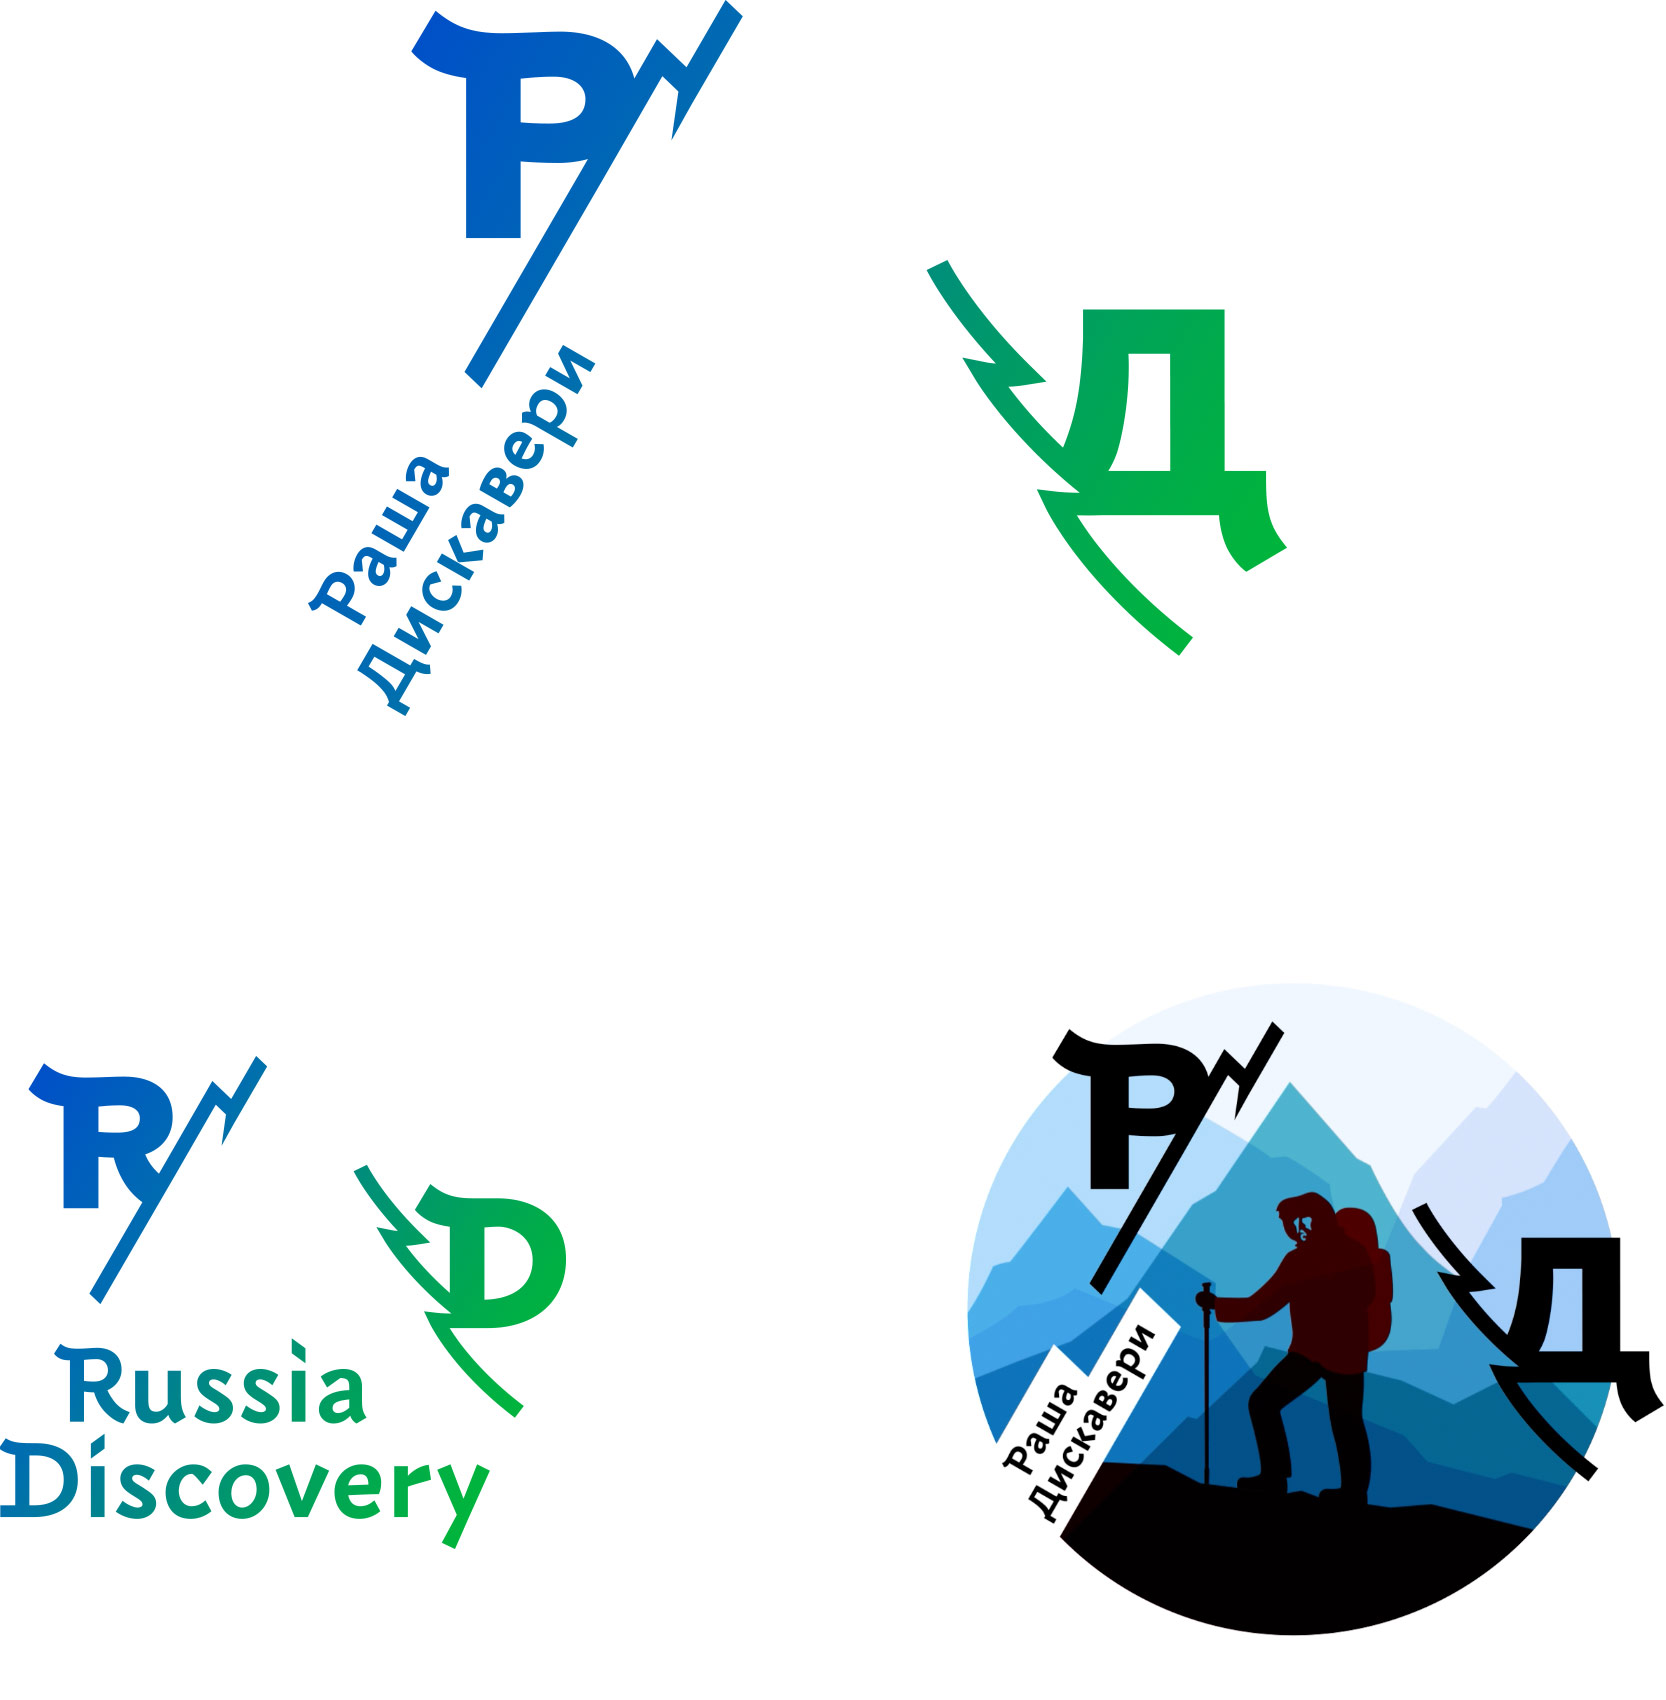 Discover russian. Раша Дискавери туроператор. Russia Discovery логотип. Russian Discovery турфирма. Russia Discovery туроператор логотип.